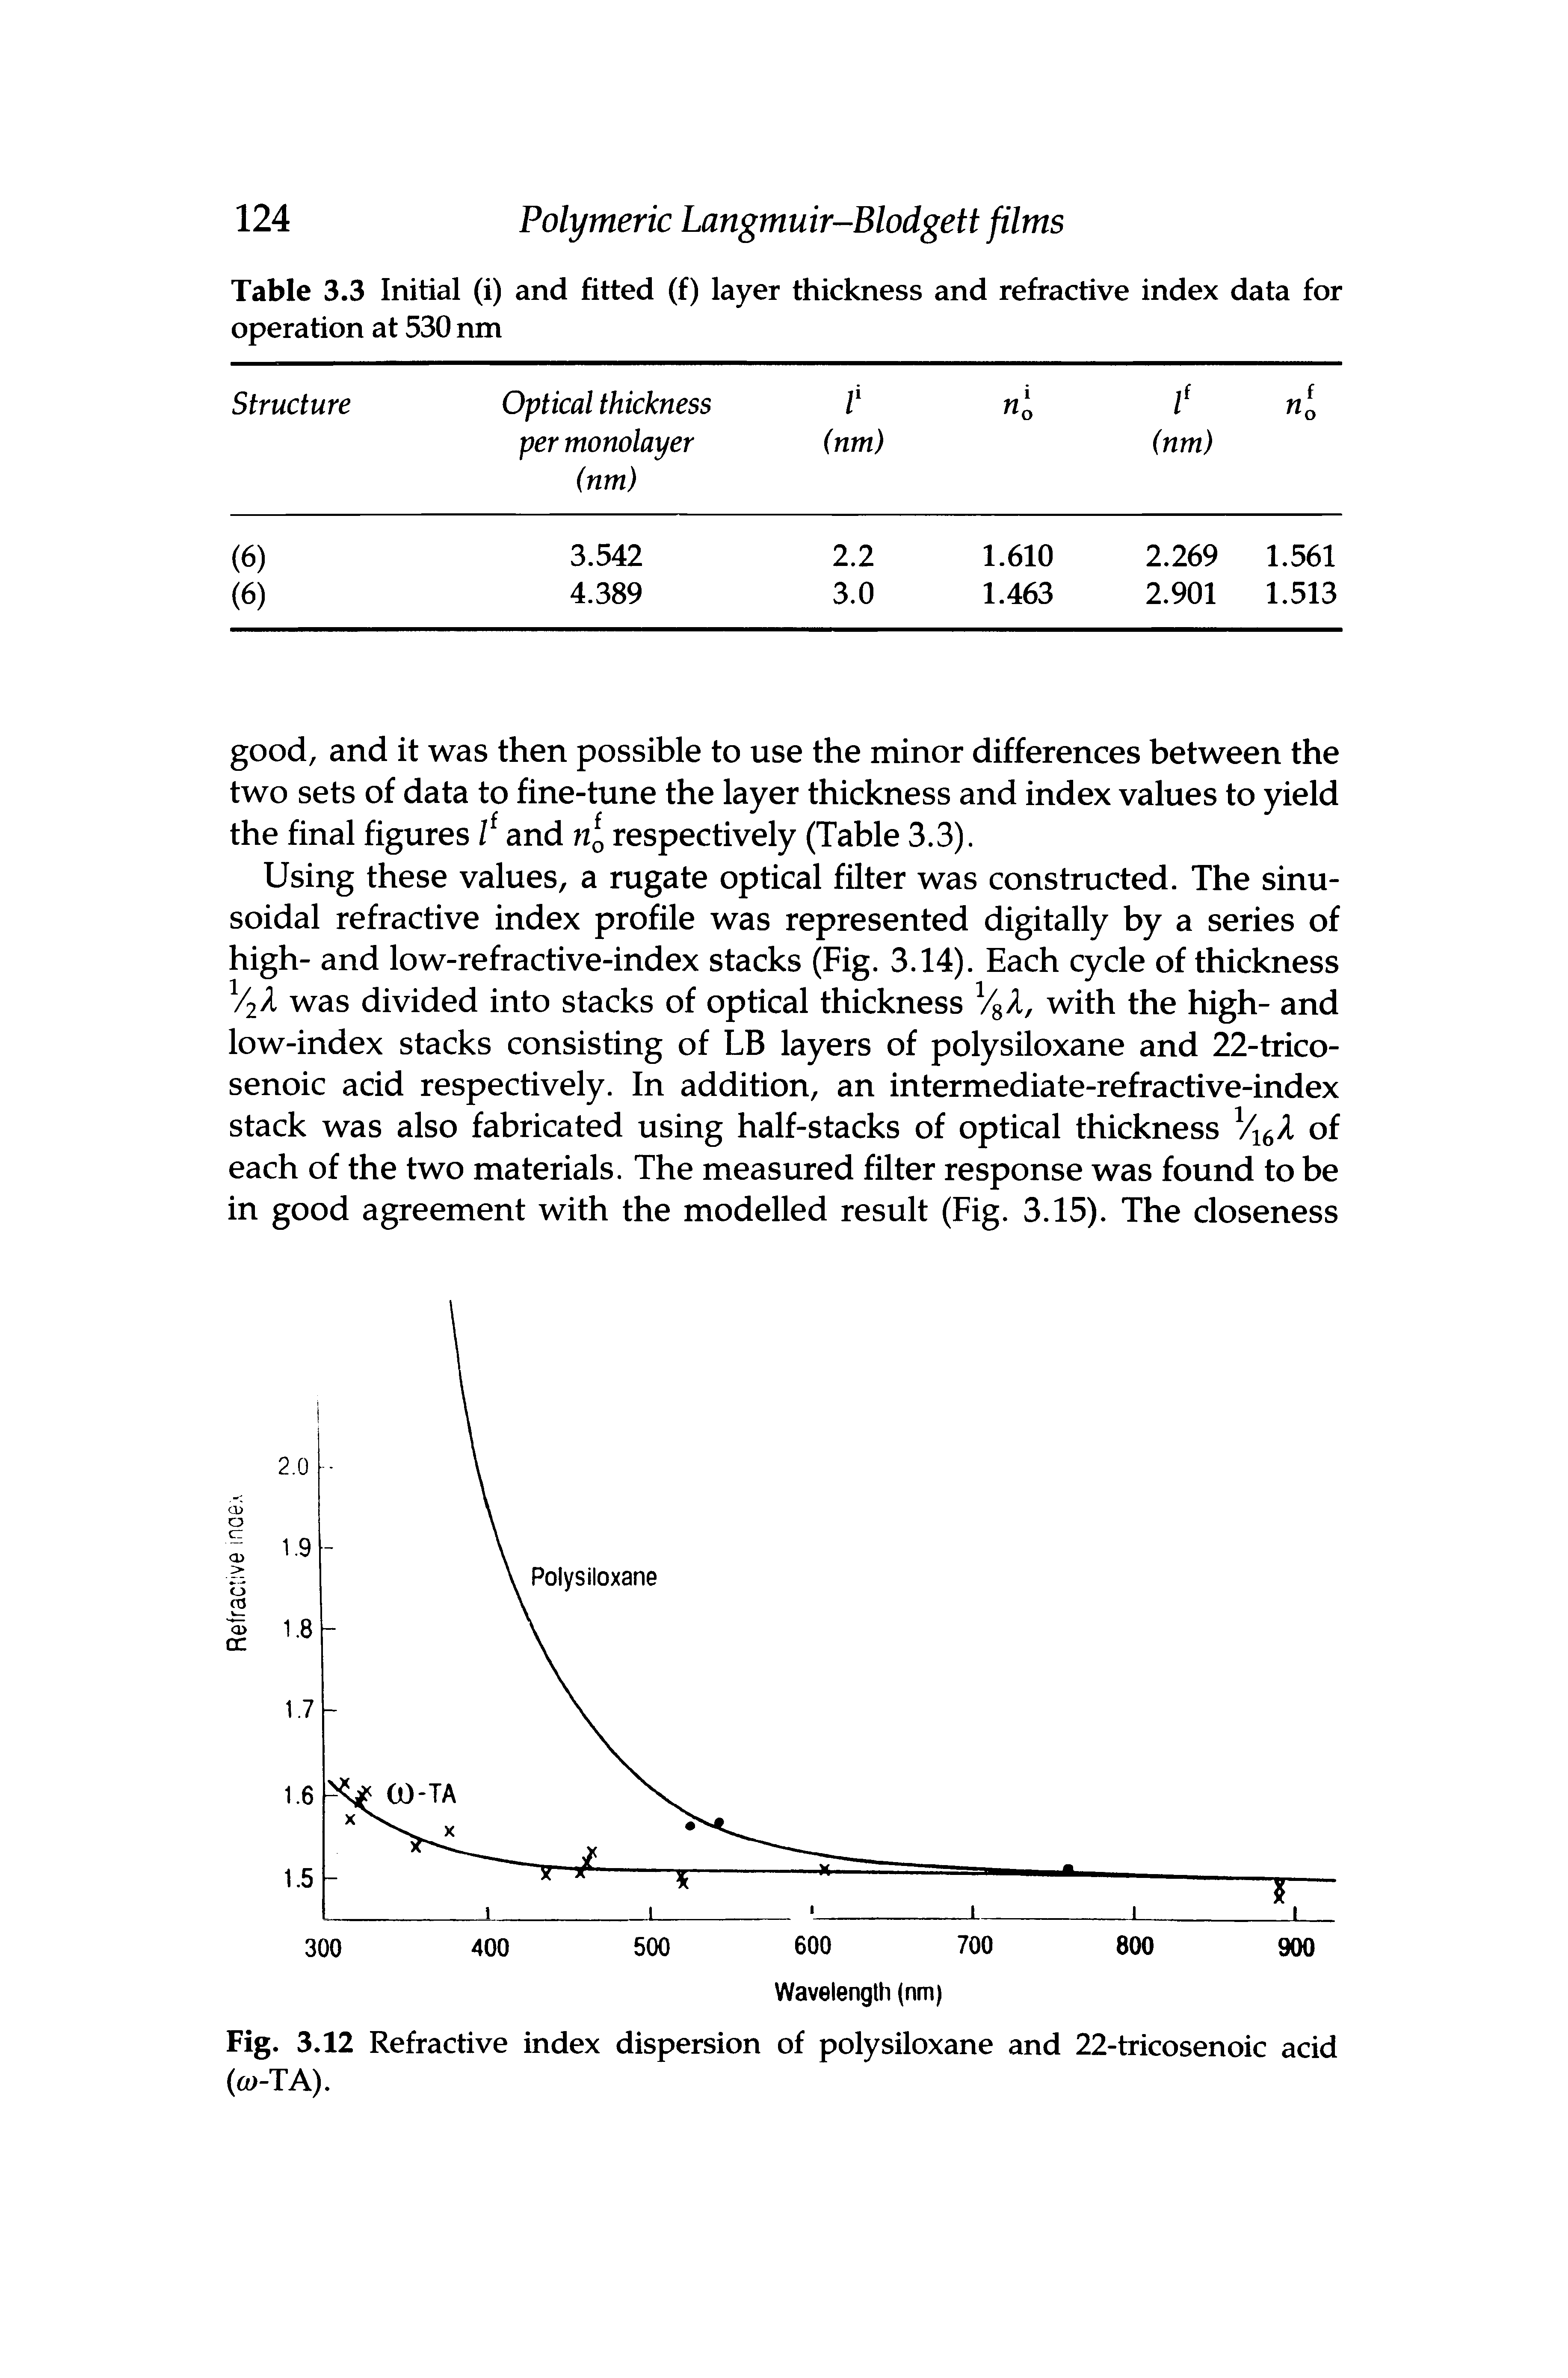 Fig. 3.12 Refractive index dispersion of polysiloxane and 22-tricosenoic acid (co-TA).